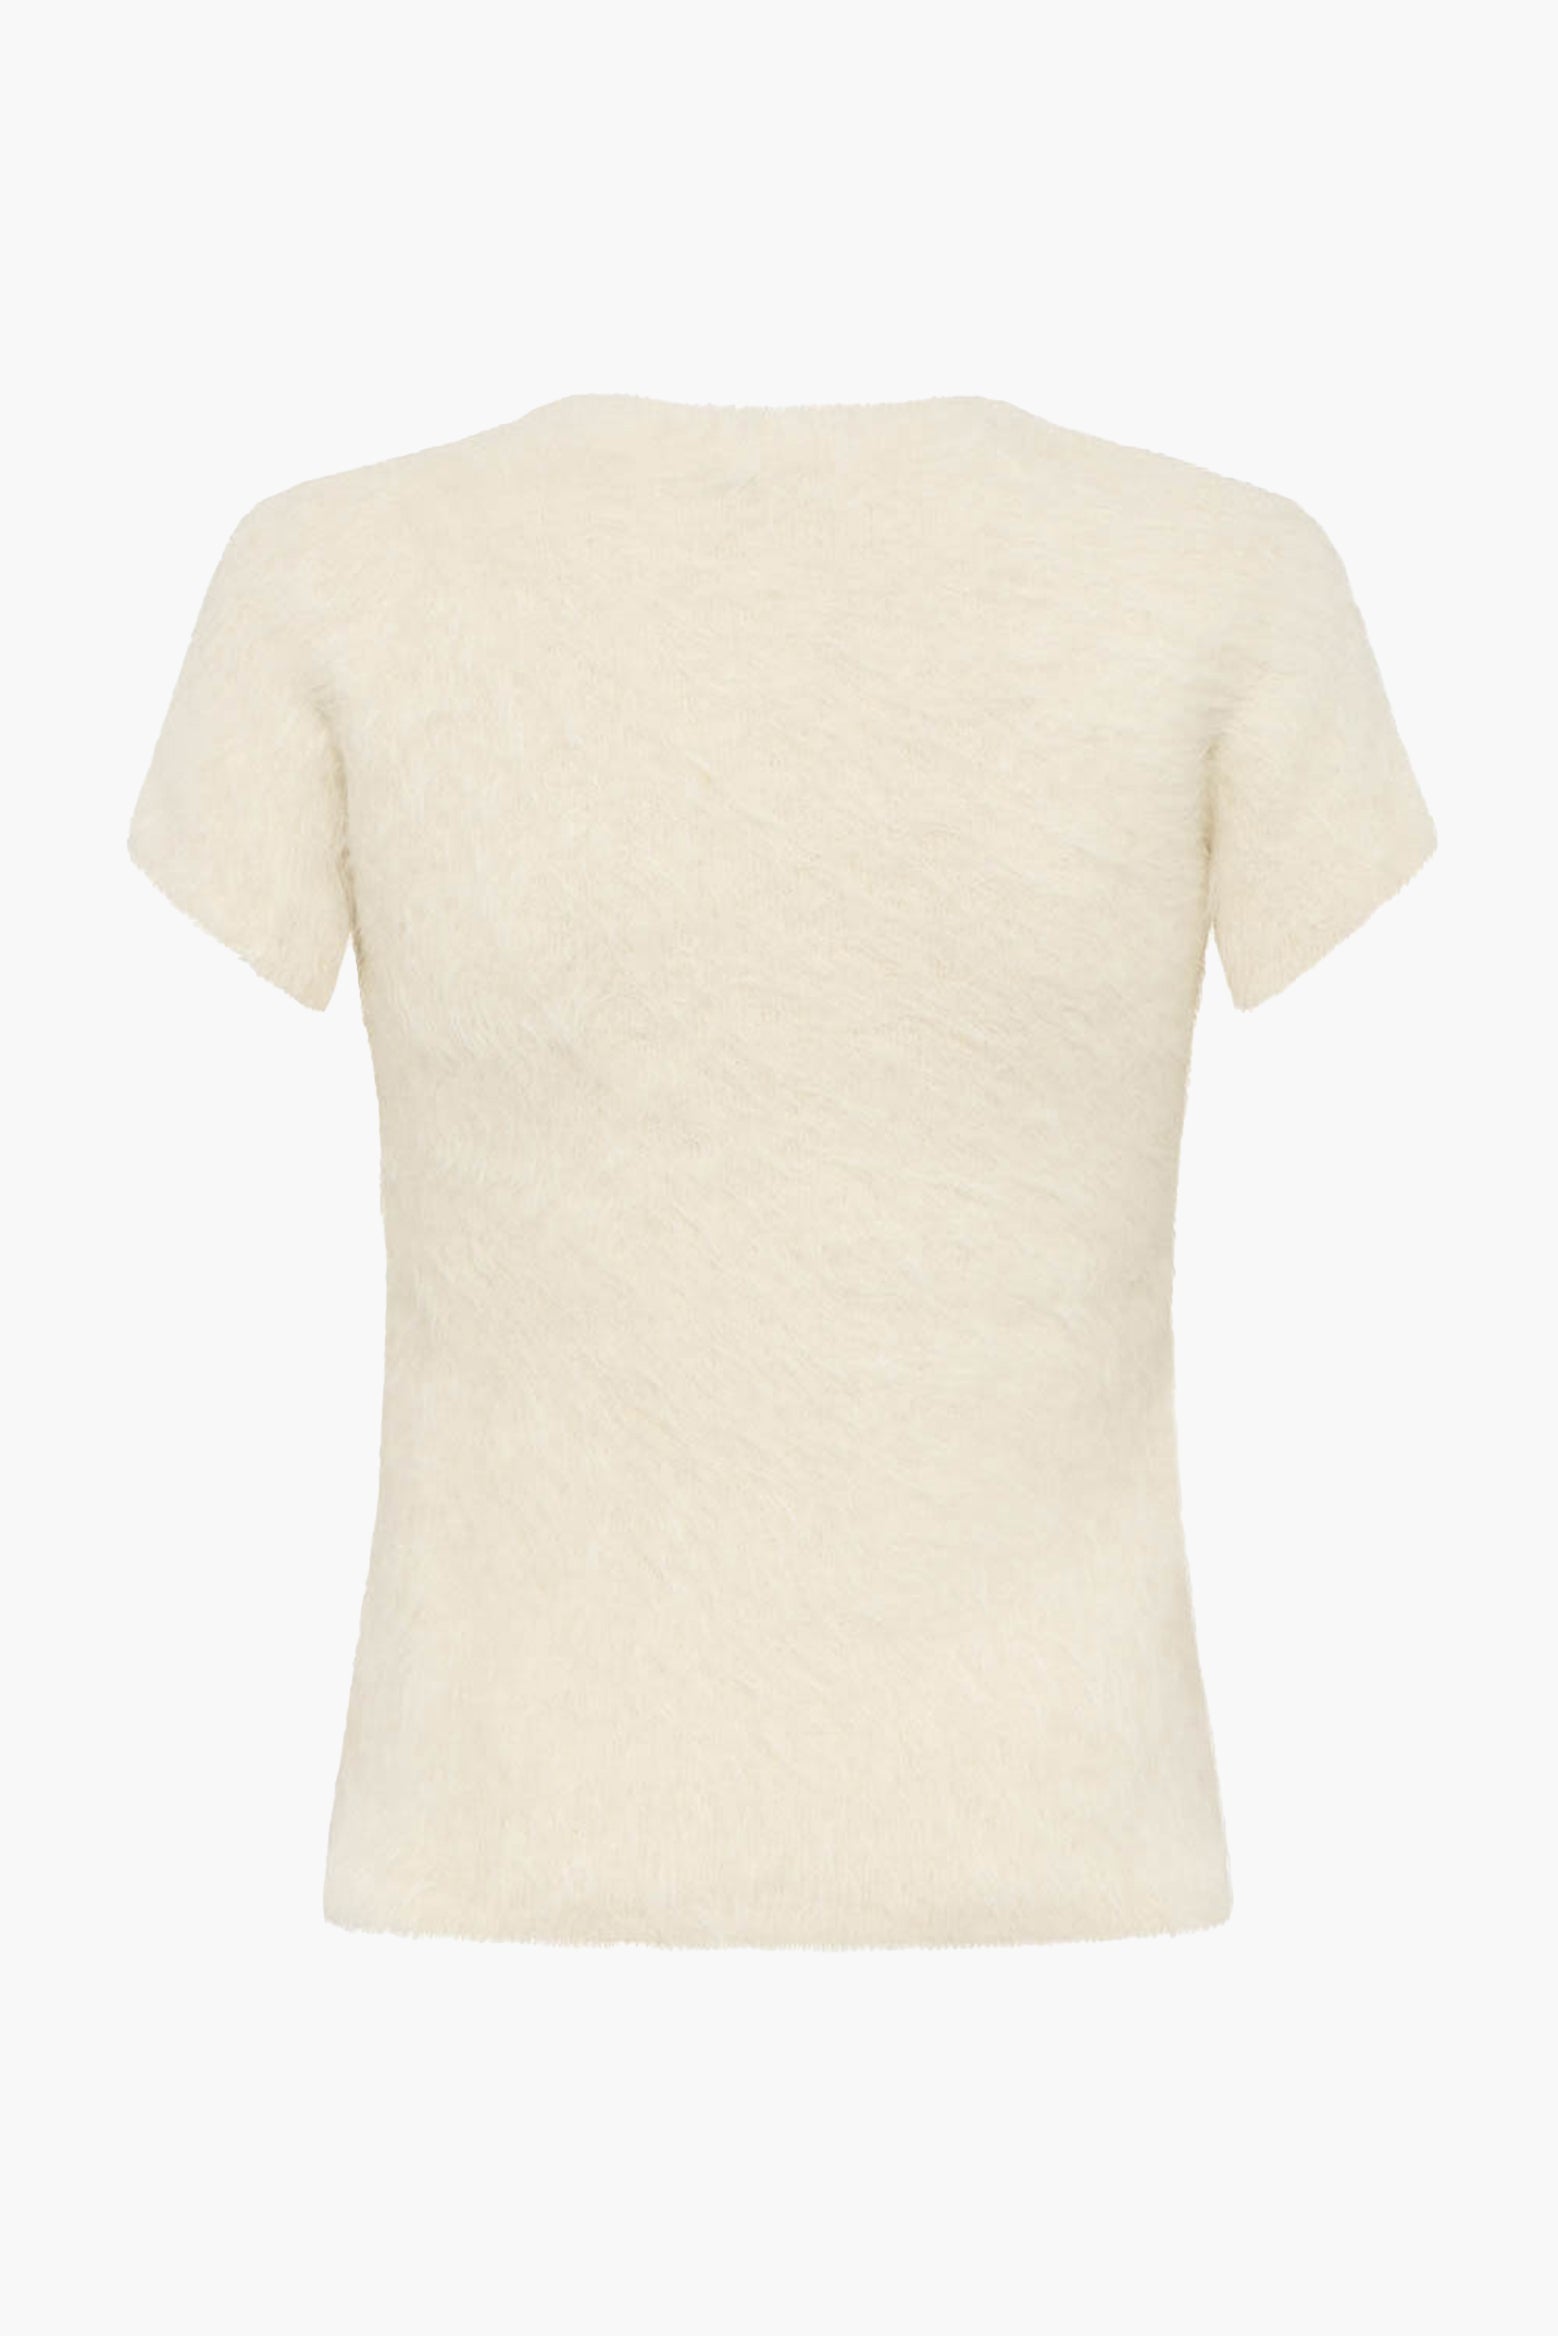 ST. AGNI Alpaca Baby Tee in Off White | The New Trend